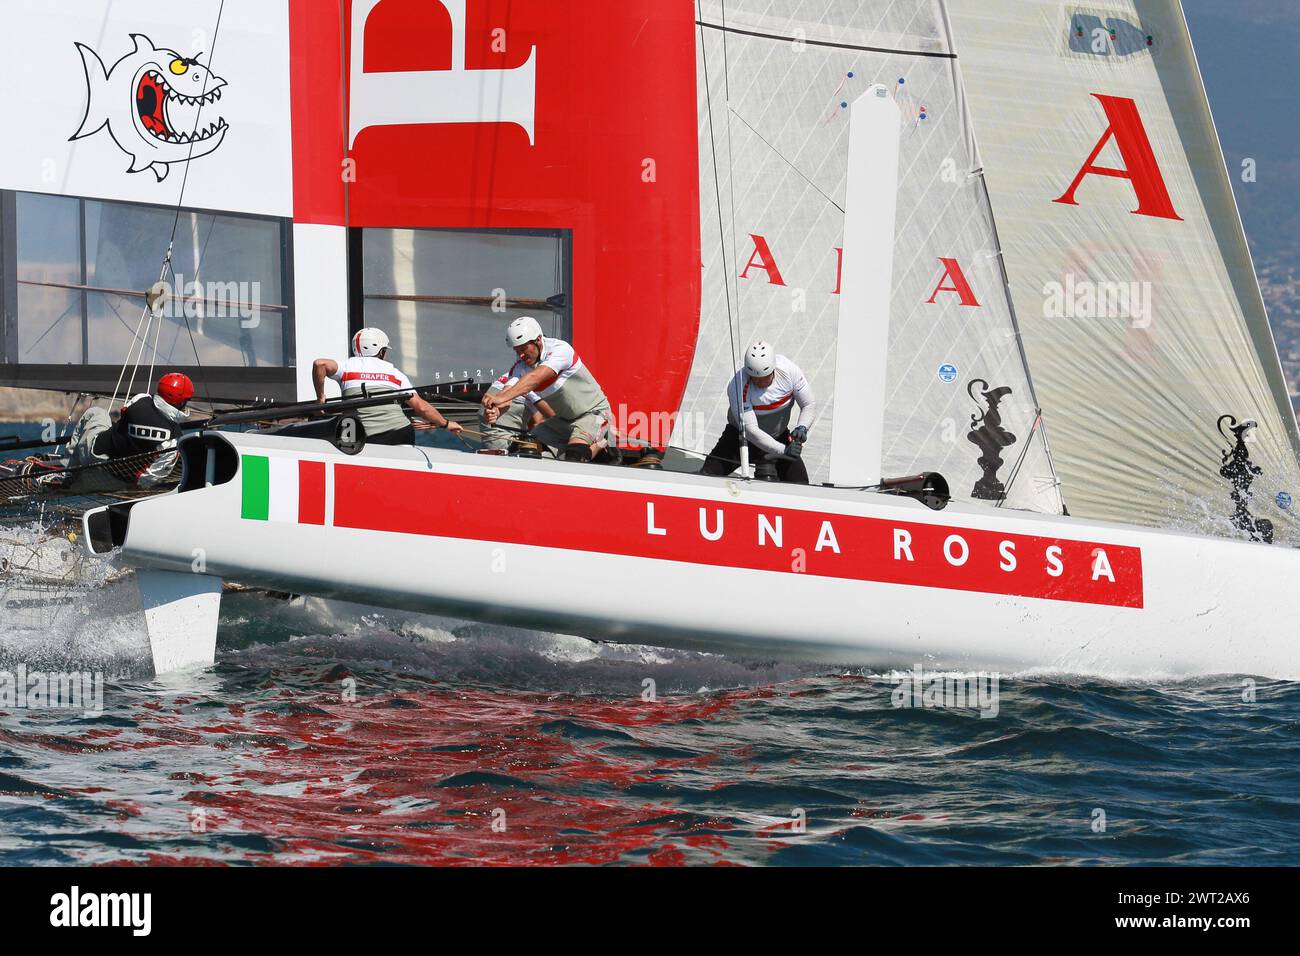 Boat of the Prada team Luna Rossa, competing for the America's cup, in the Gulf of Naples Stock Photo